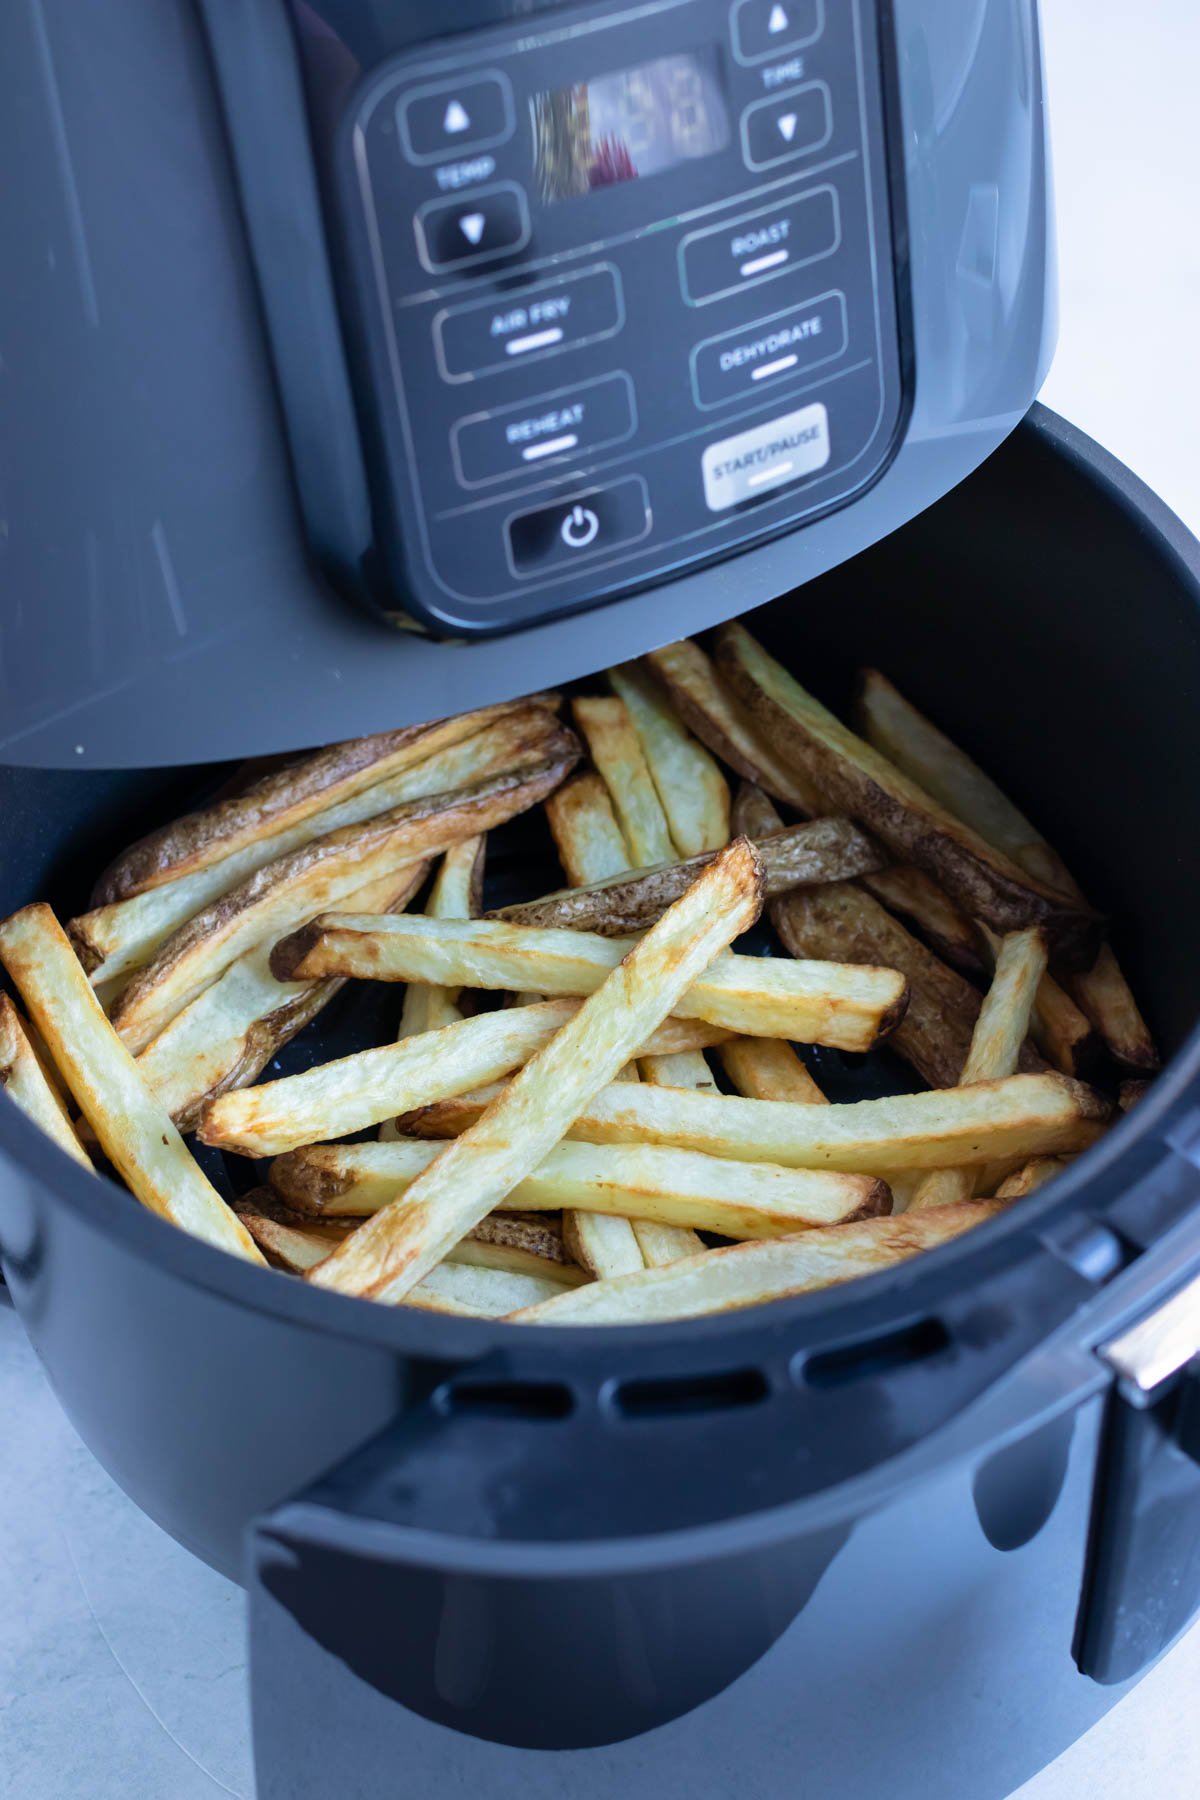 Crispy french fries are cooked in a Ninja.